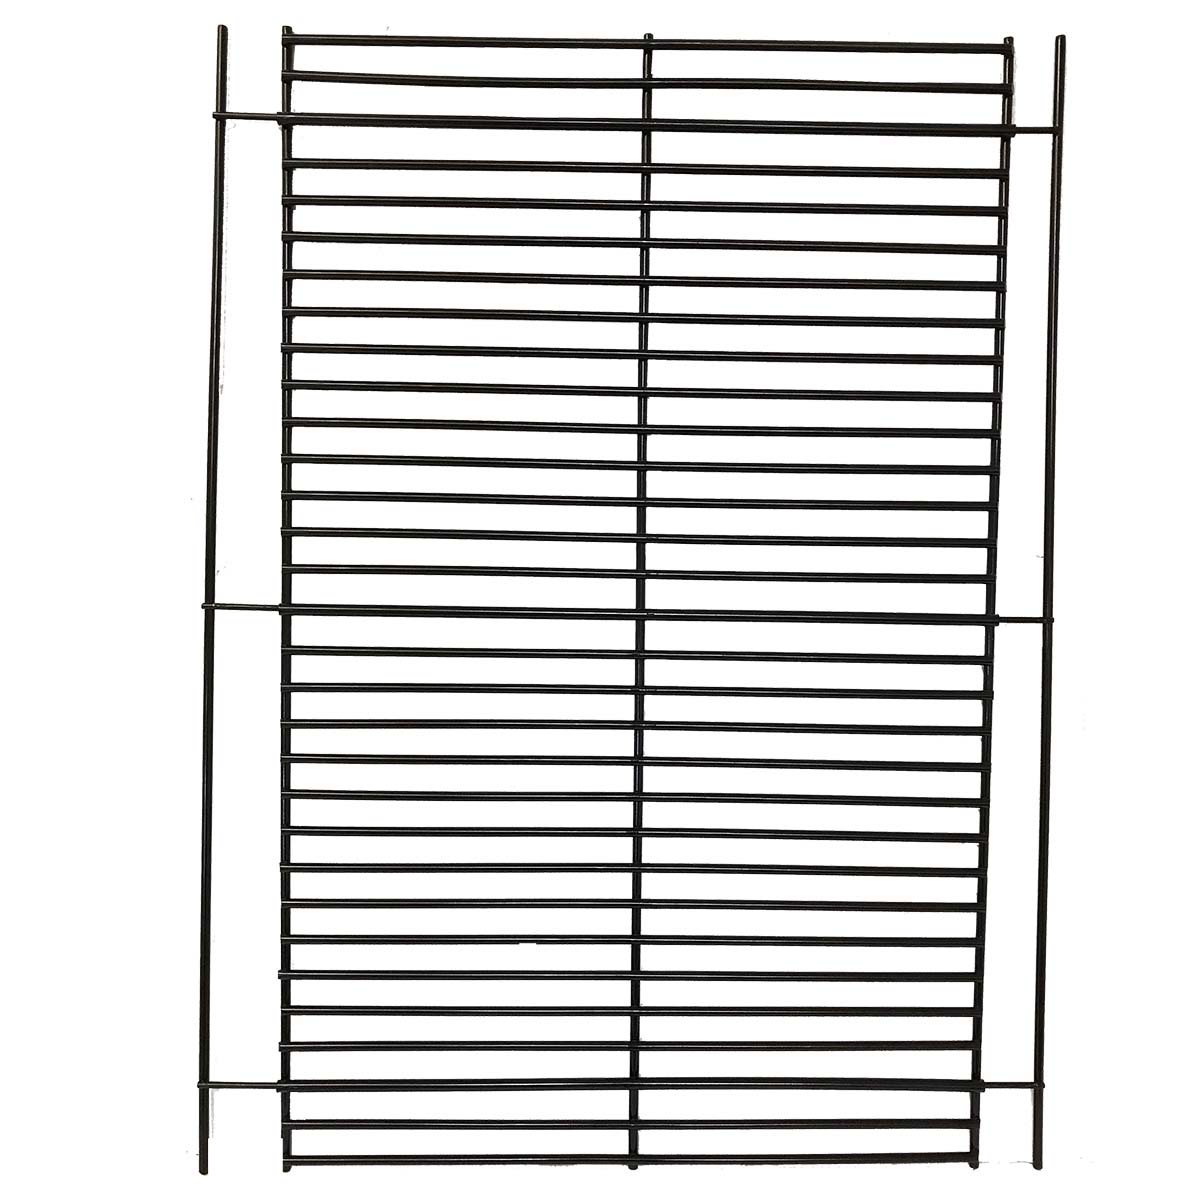 Picture of 21 Century B21A2 Porcelain Coated Grid - Extra Large